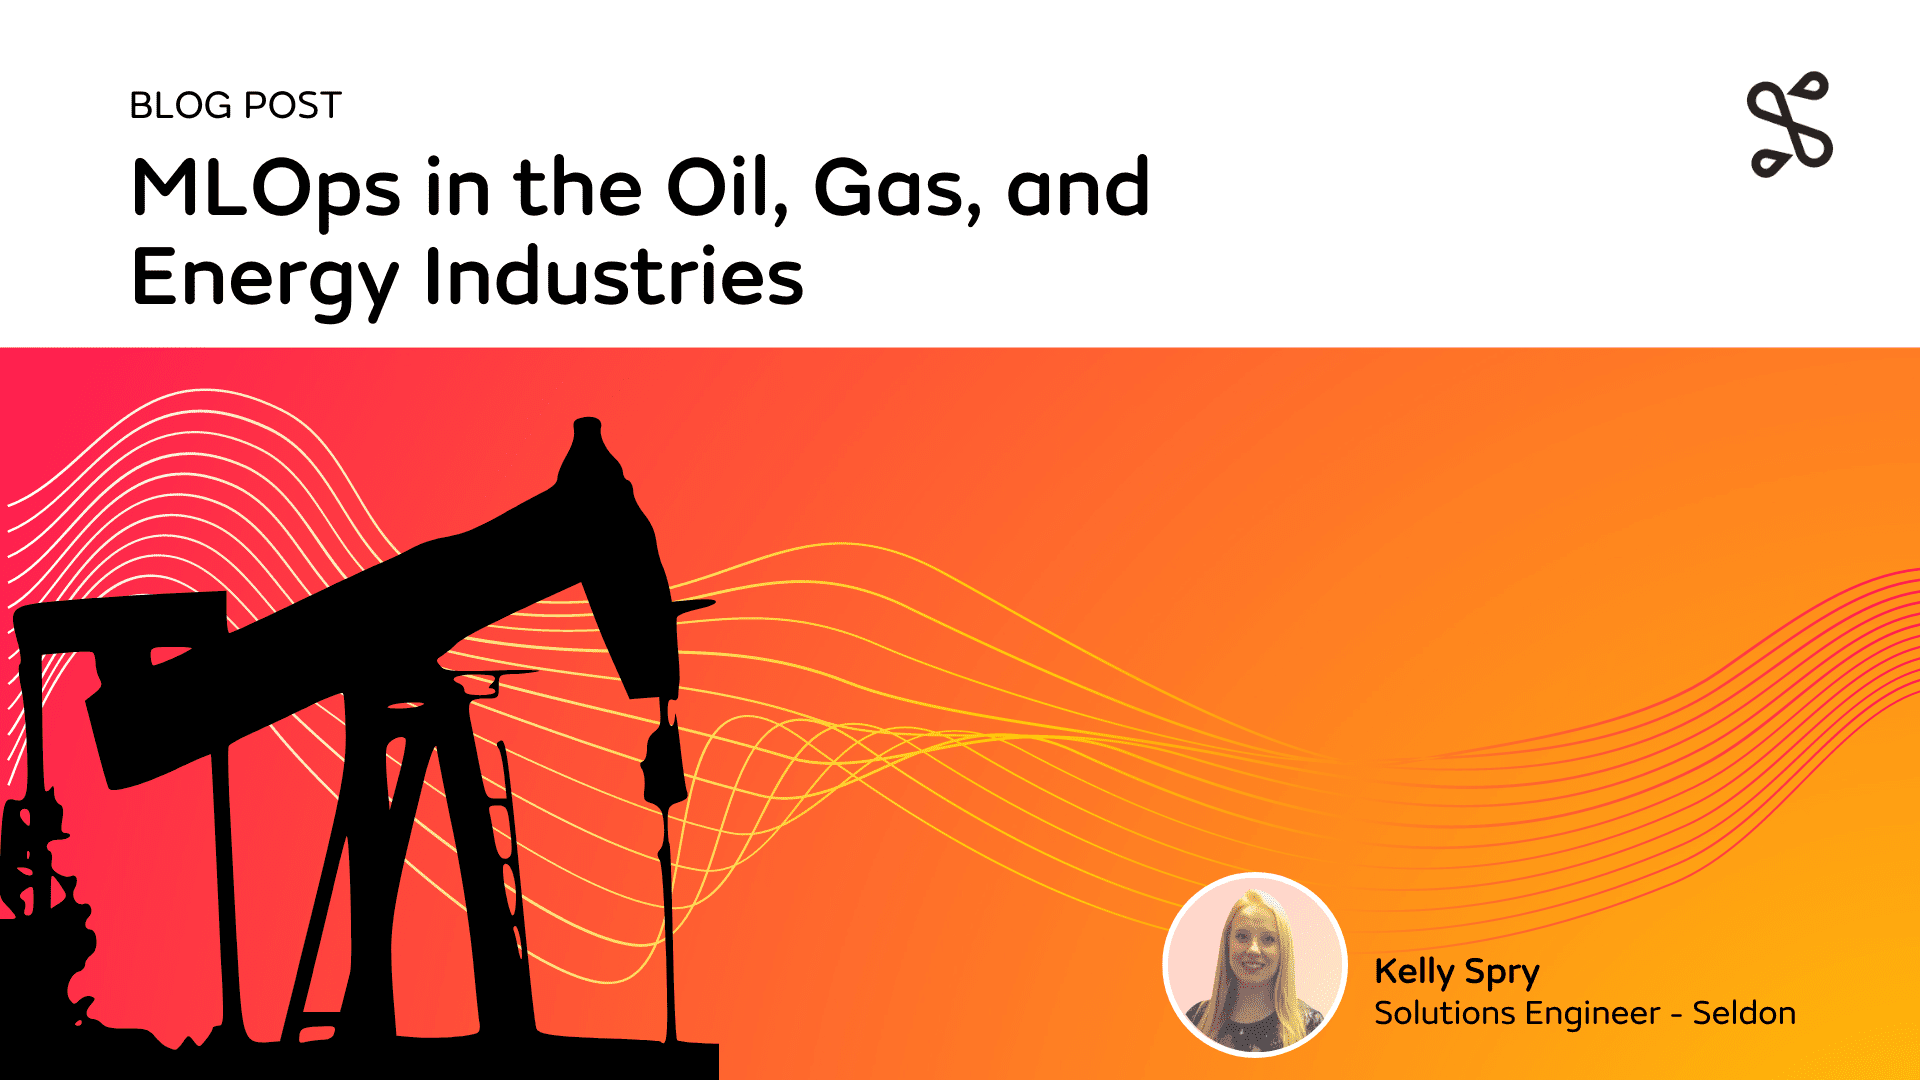 MLOps in Oil, Gas, and Energy